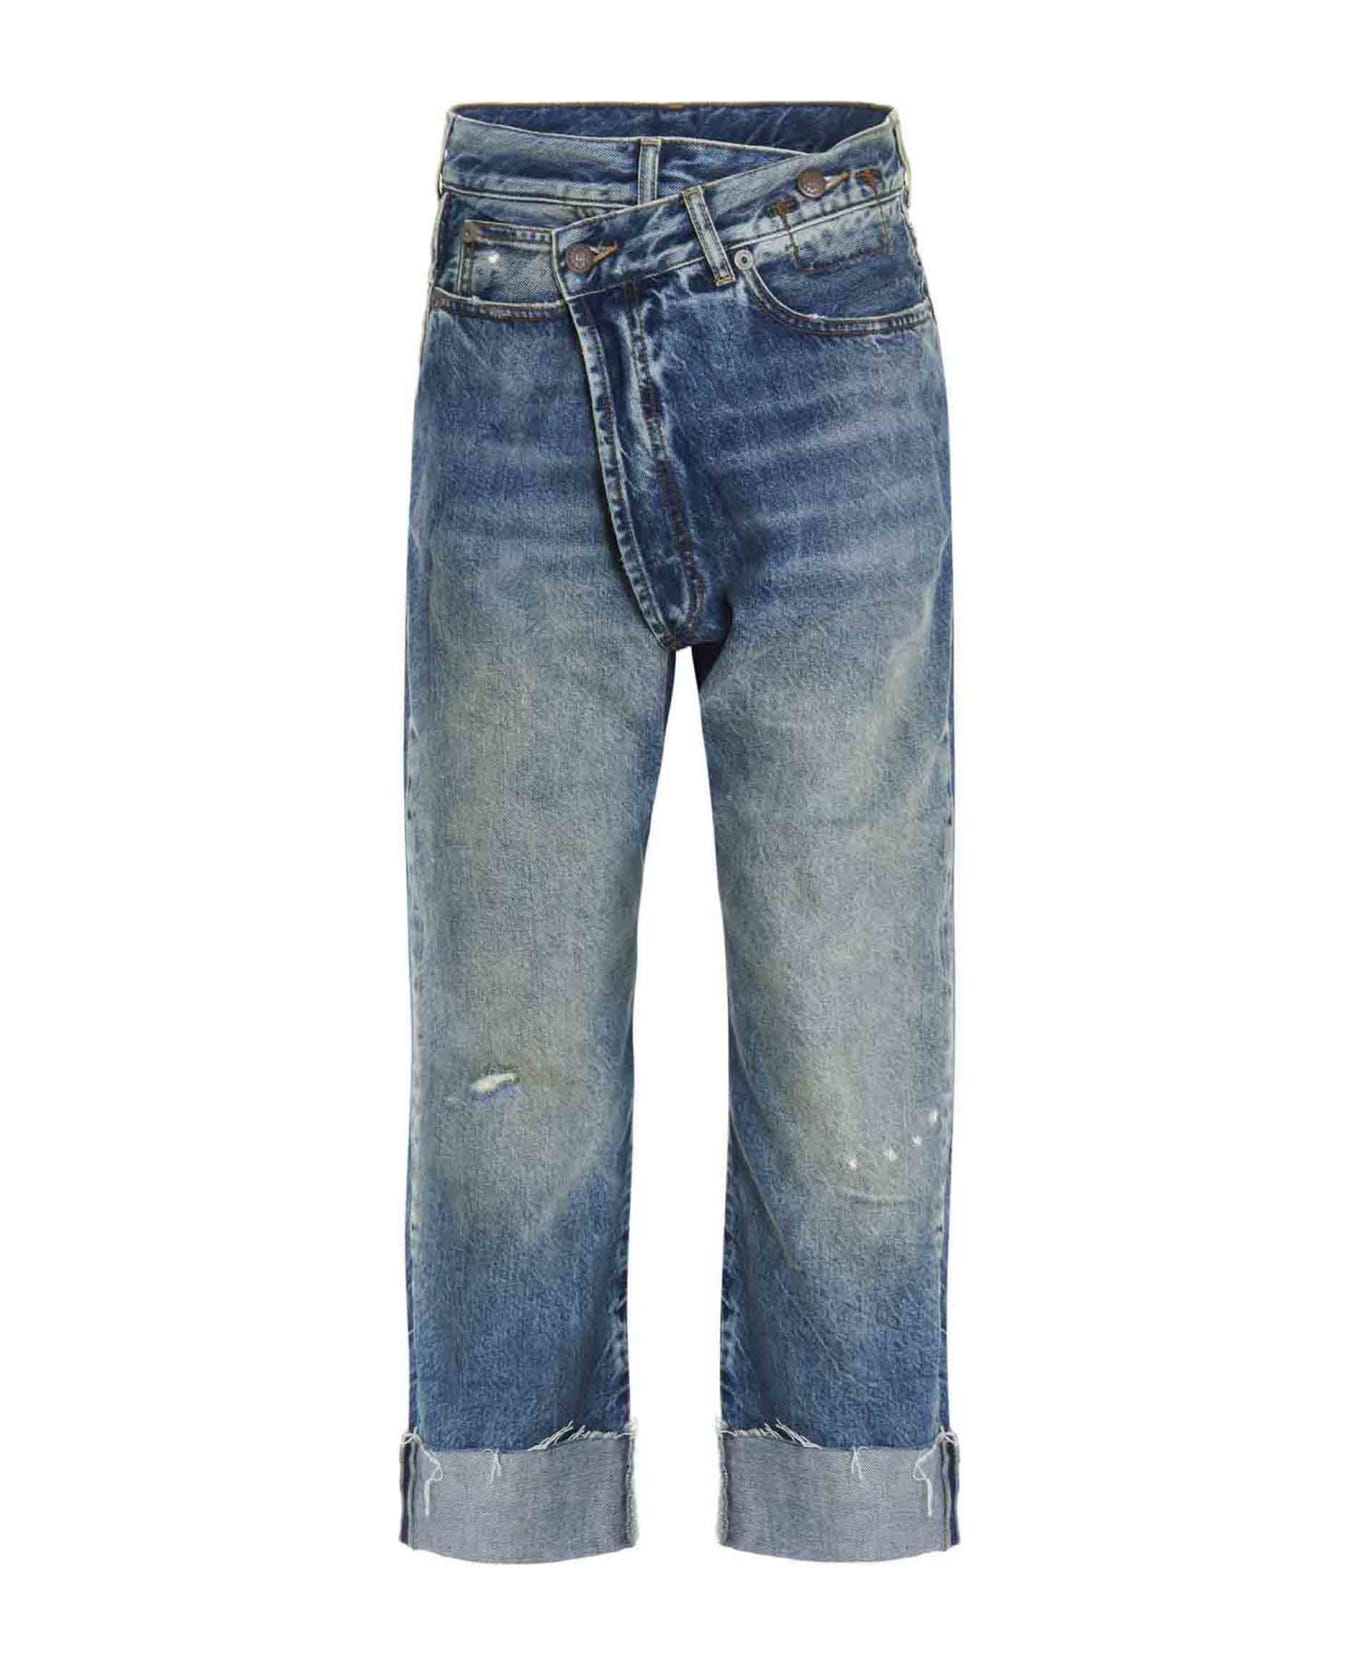 R13 Jeans 'cross Over' - Blue